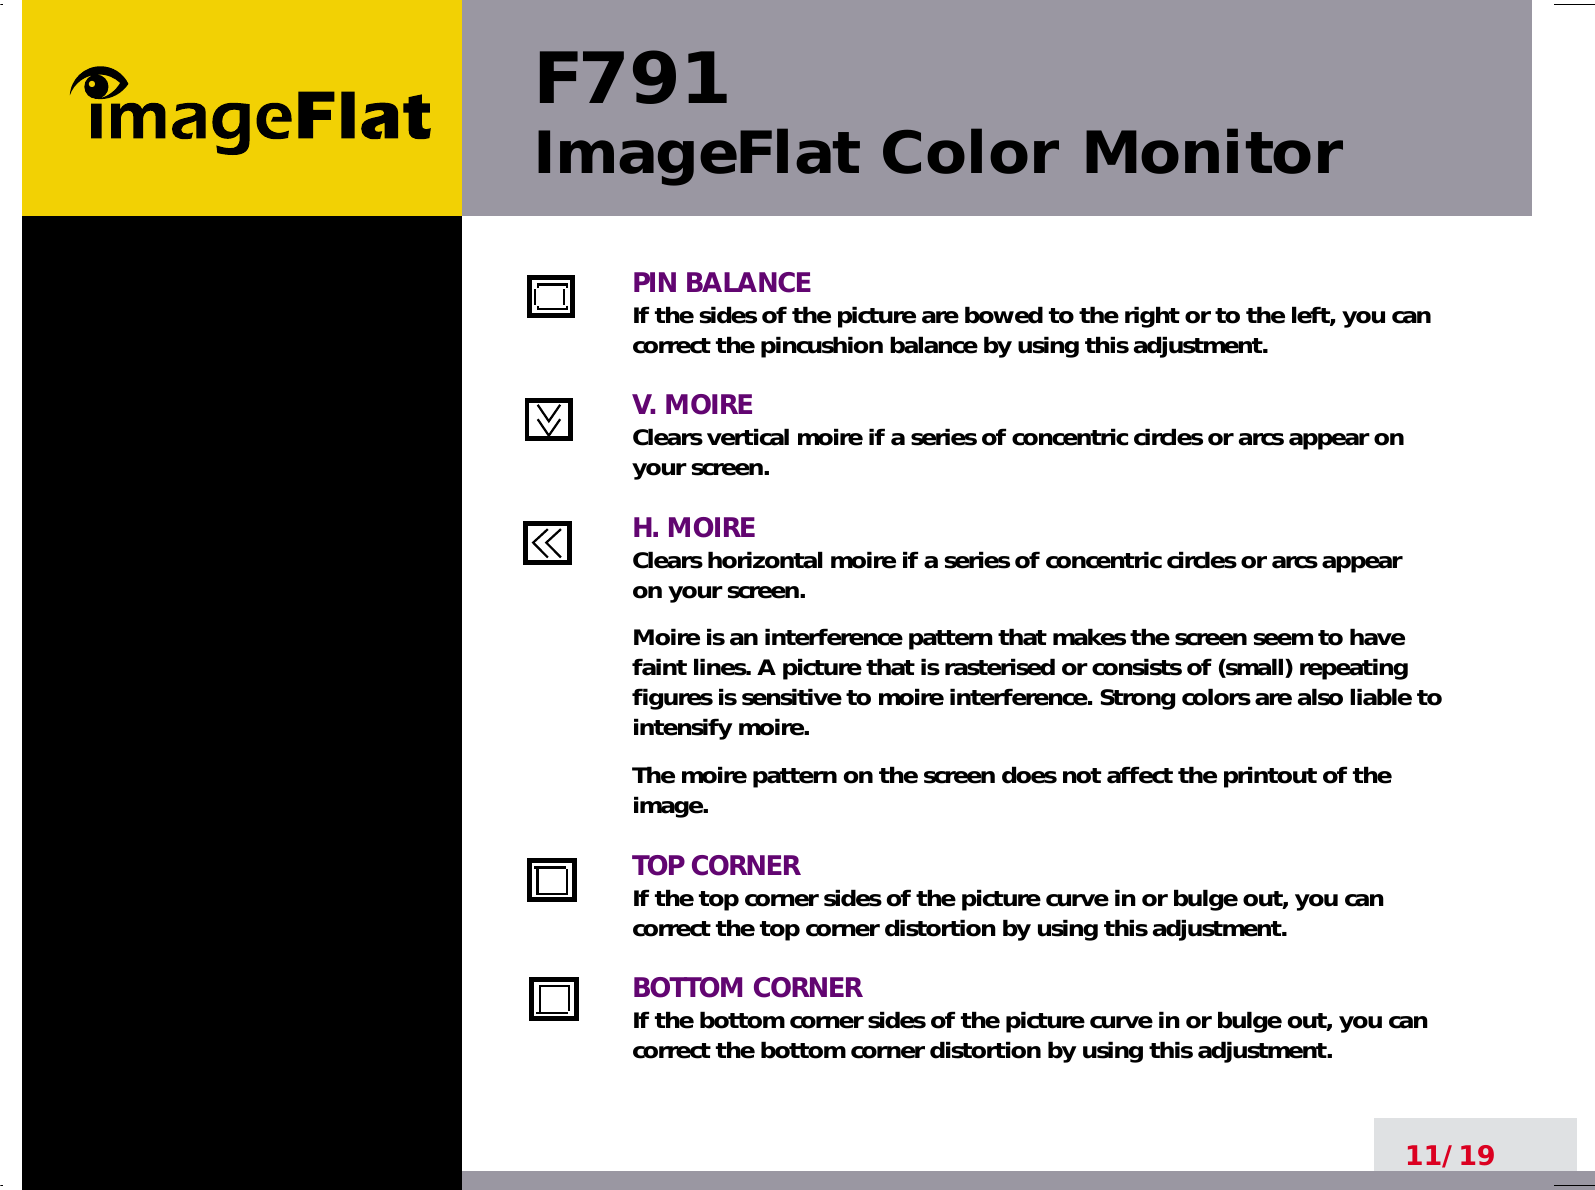 F791ImageFlat Color Monitor11/19PIN BALANCEIf the sides of the picture are bowed to the right or to the left, you cancorrect the pincushion balance by using this adjustment.V. MOIREClears vertical moire if a series of concentric circles or arcs appear on your screen.H. MOIREClears horizontal moire if a series of concentric circles or arcs appear on your screen.Moire is an interference pattern that makes the screen seem to havefaint lines. A picture that is rasterised or consists of (small) repeatingfigures is sensitive to moire interference. Strong colors are also liable tointensify moire. The moire pattern on the screen does not affect the printout of theimage.TOP CORNERIf the top corner sides of the picture curve in or bulge out, you cancorrect the top corner distortion by using this adjustment.BOTTOM CORNERIf the bottom corner sides of the picture curve in or bulge out, you cancorrect the bottom corner distortion by using this adjustment.